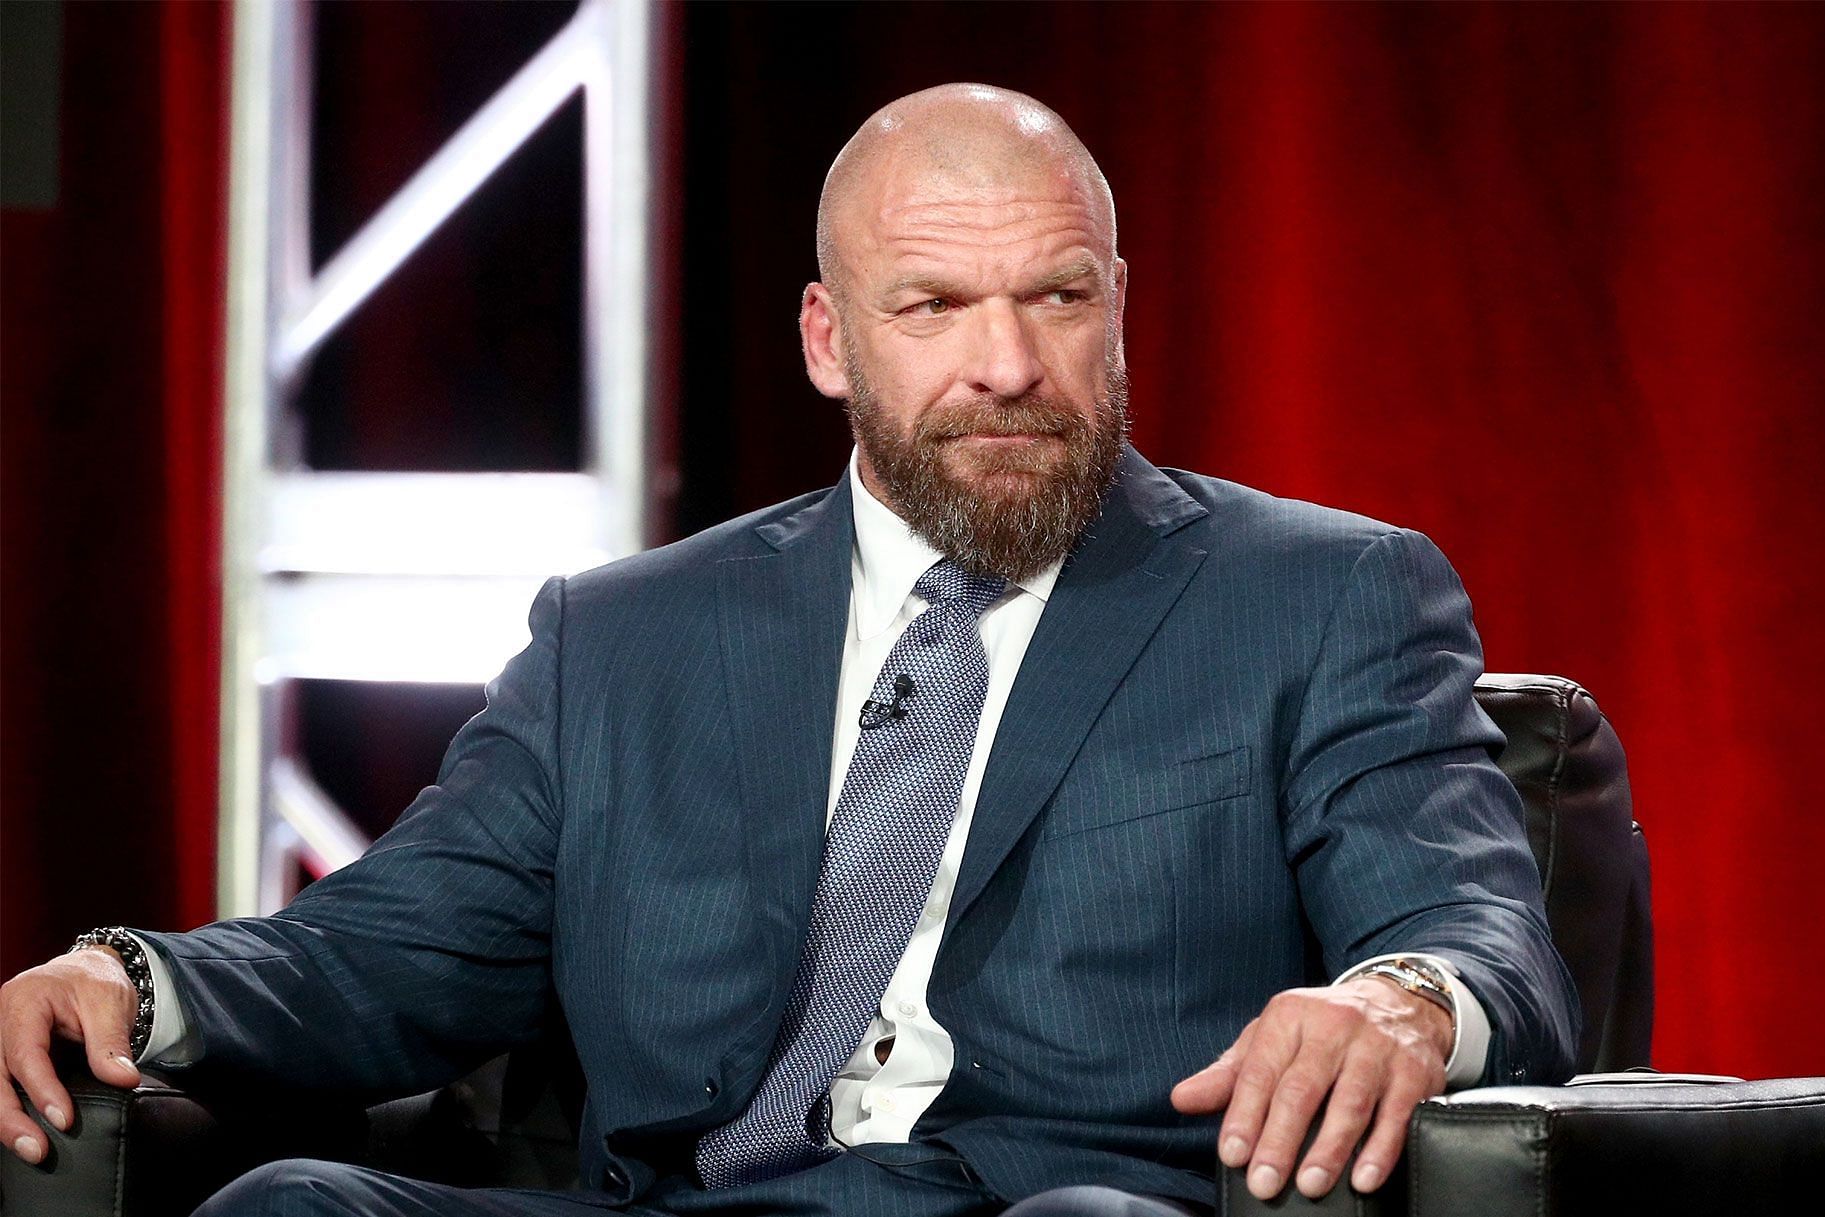 Triple H will complete one year as WWE Chief Content Officer at SummerSlam